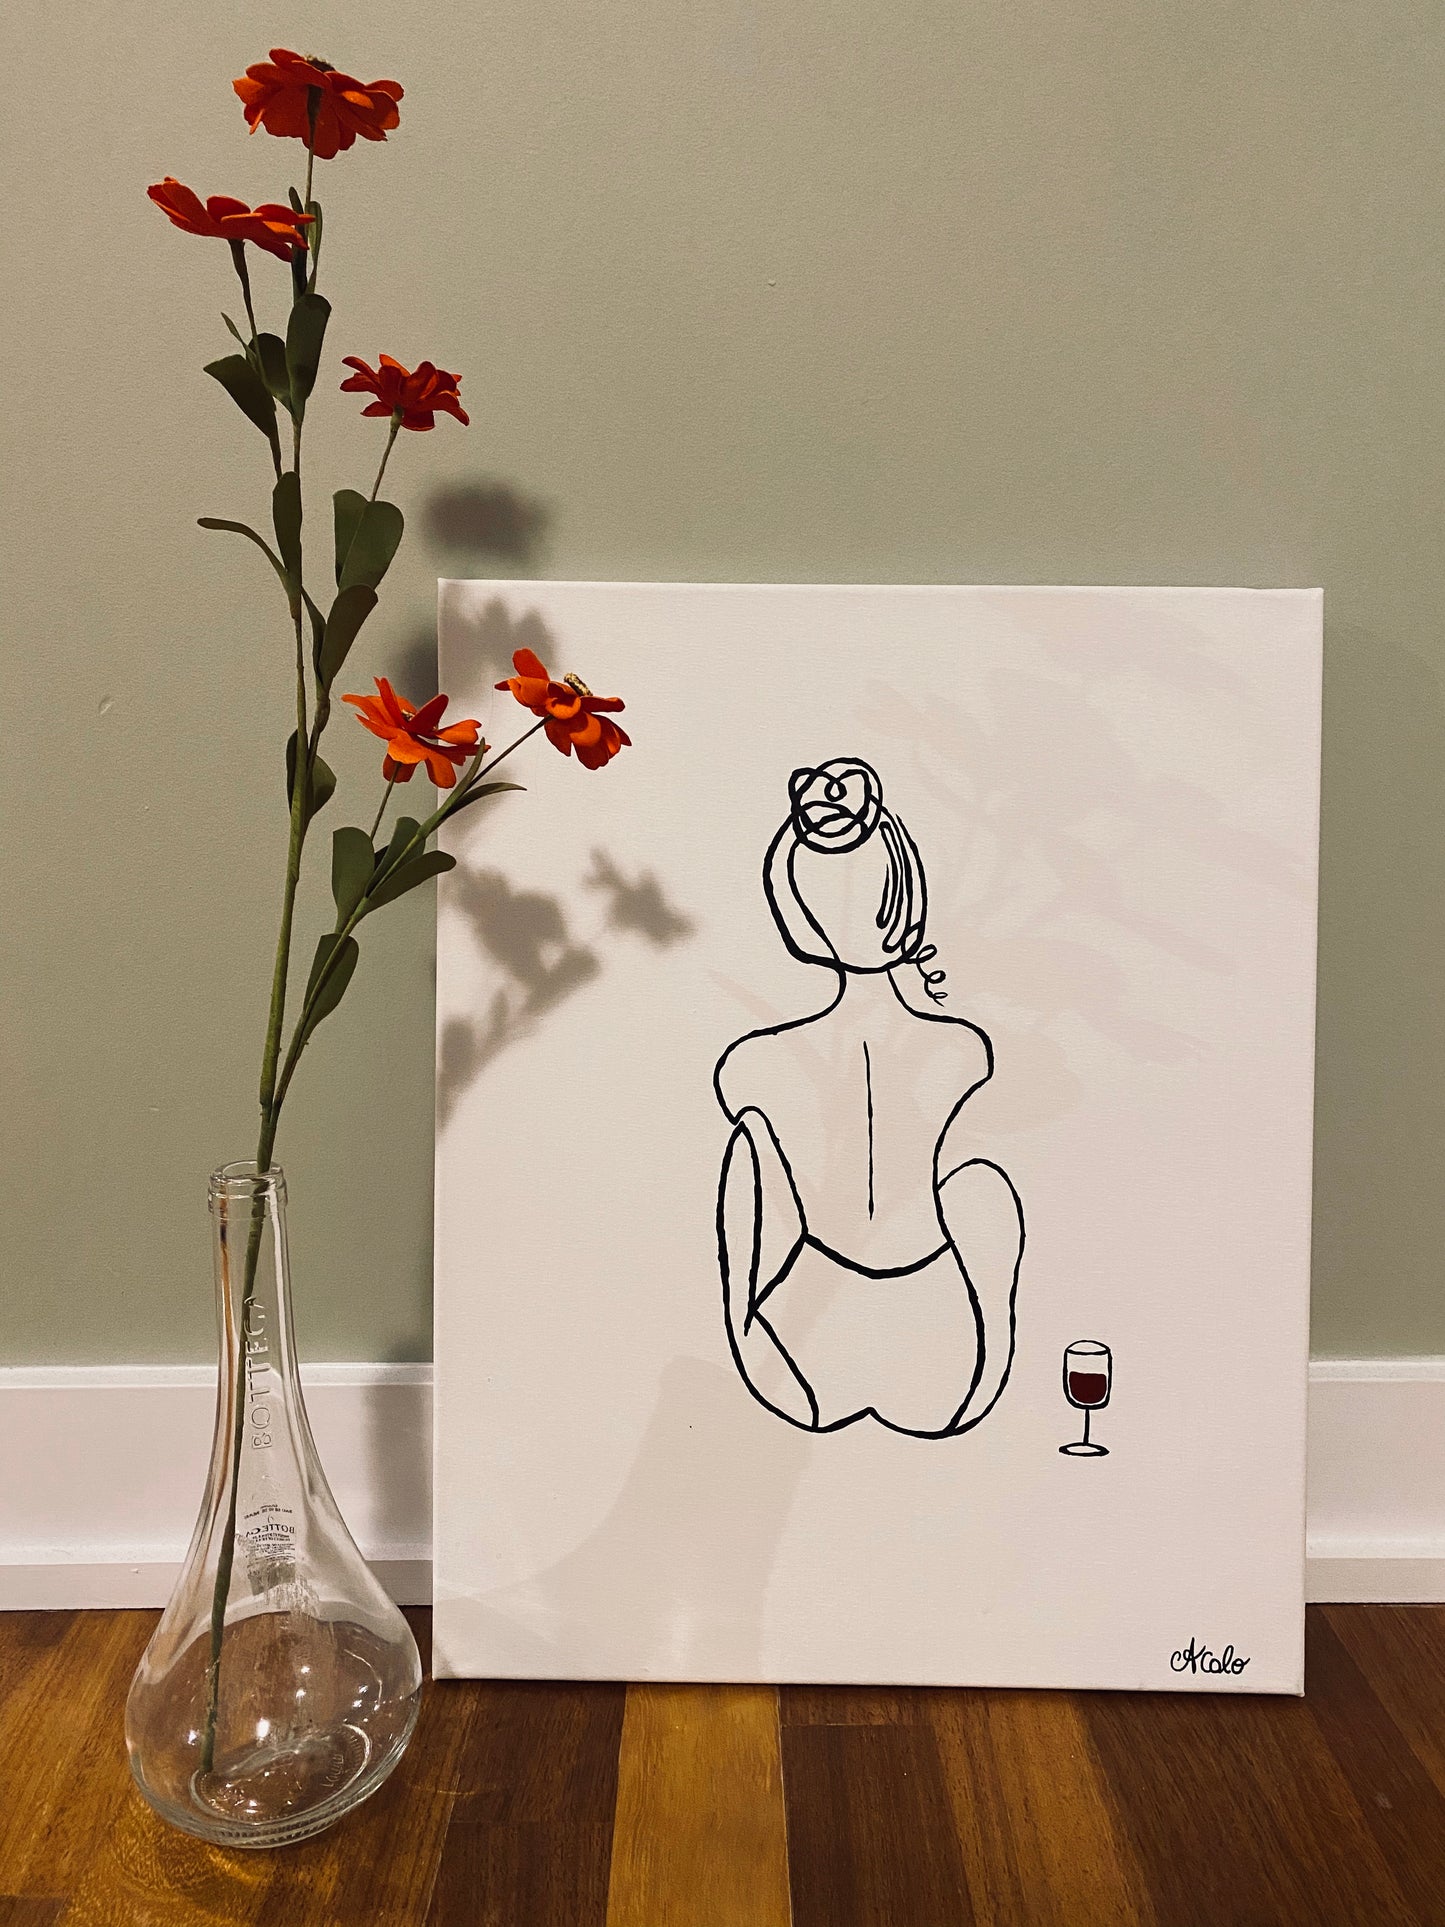 A Lady and her Red Wine